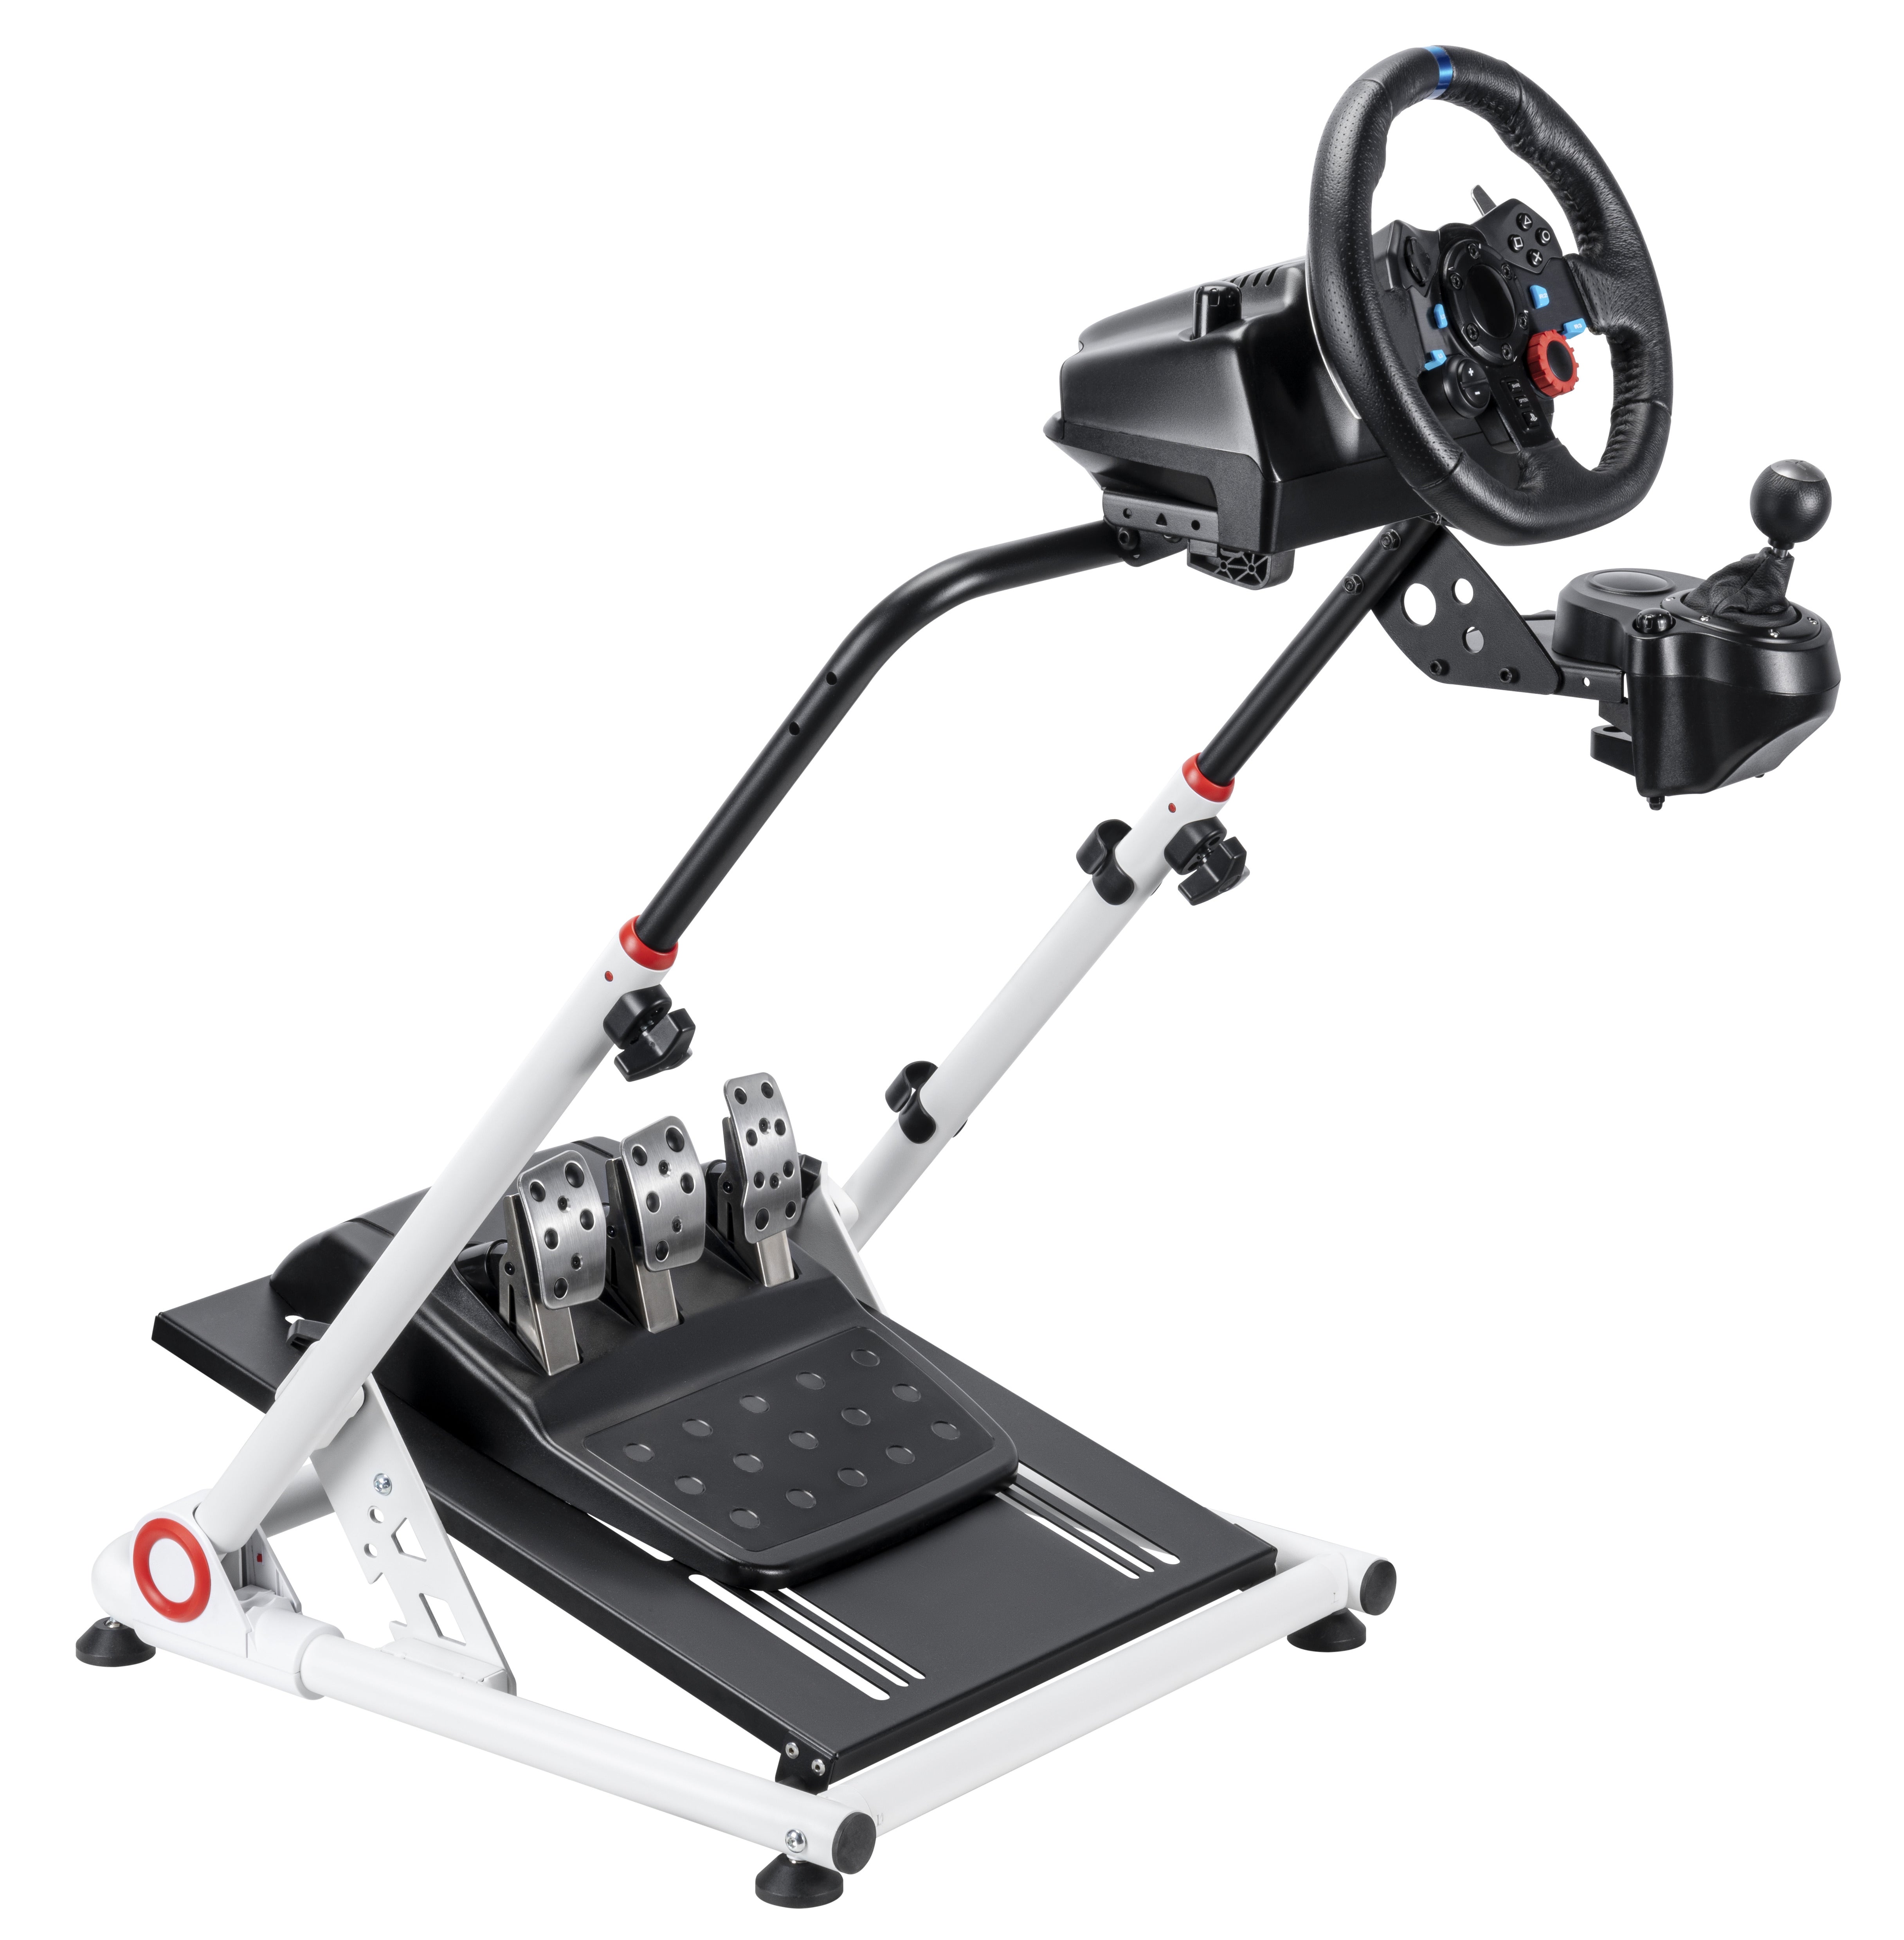 The Double Stem Ultimate Steering Wheel Stand